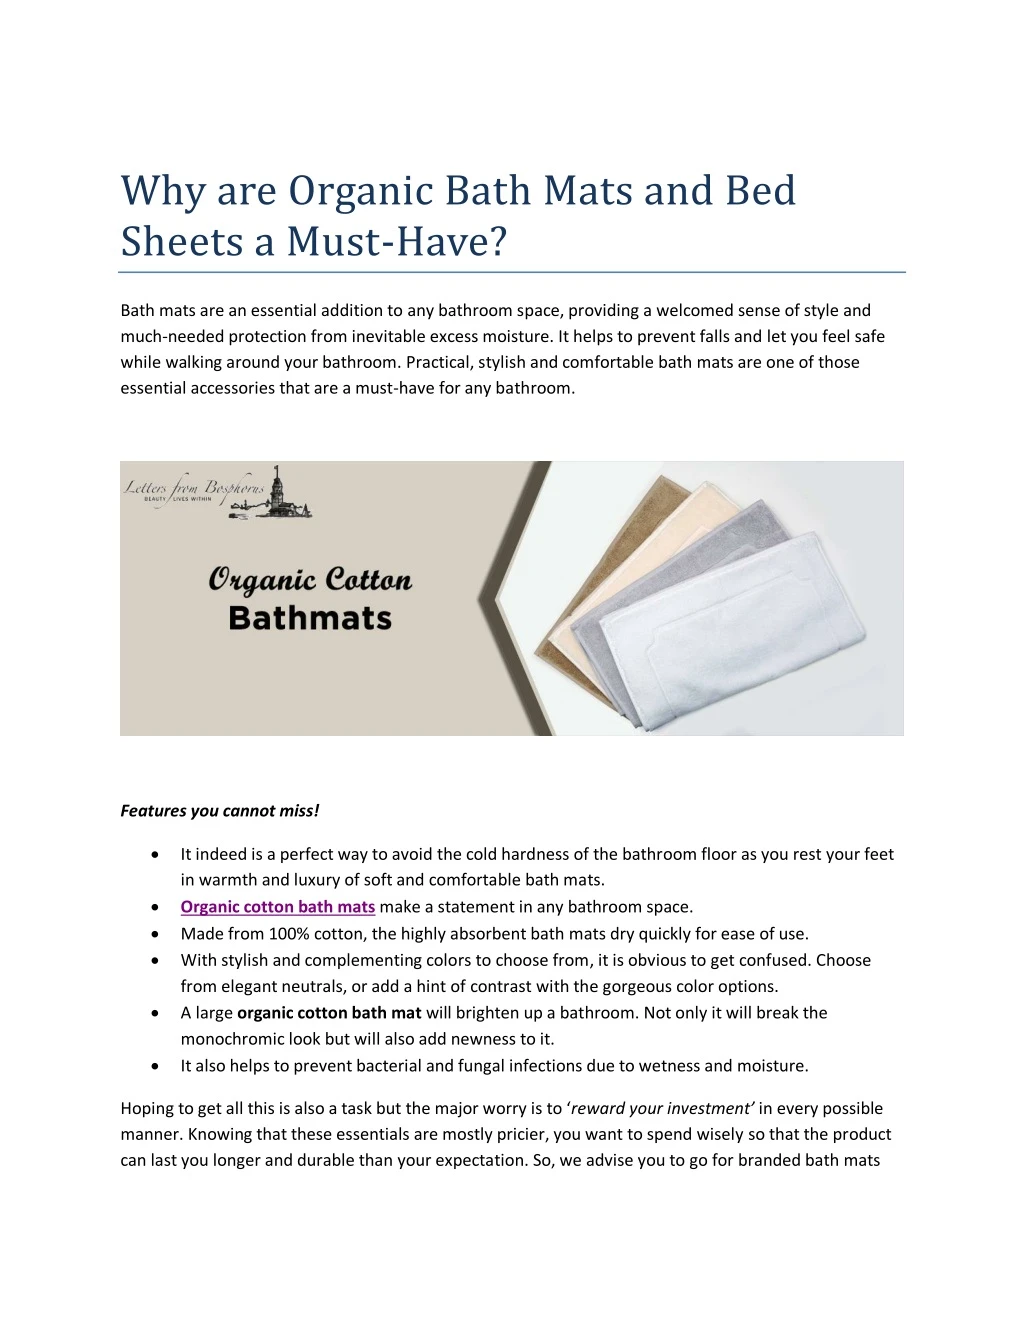 why are organic bath mats and bed sheets a must